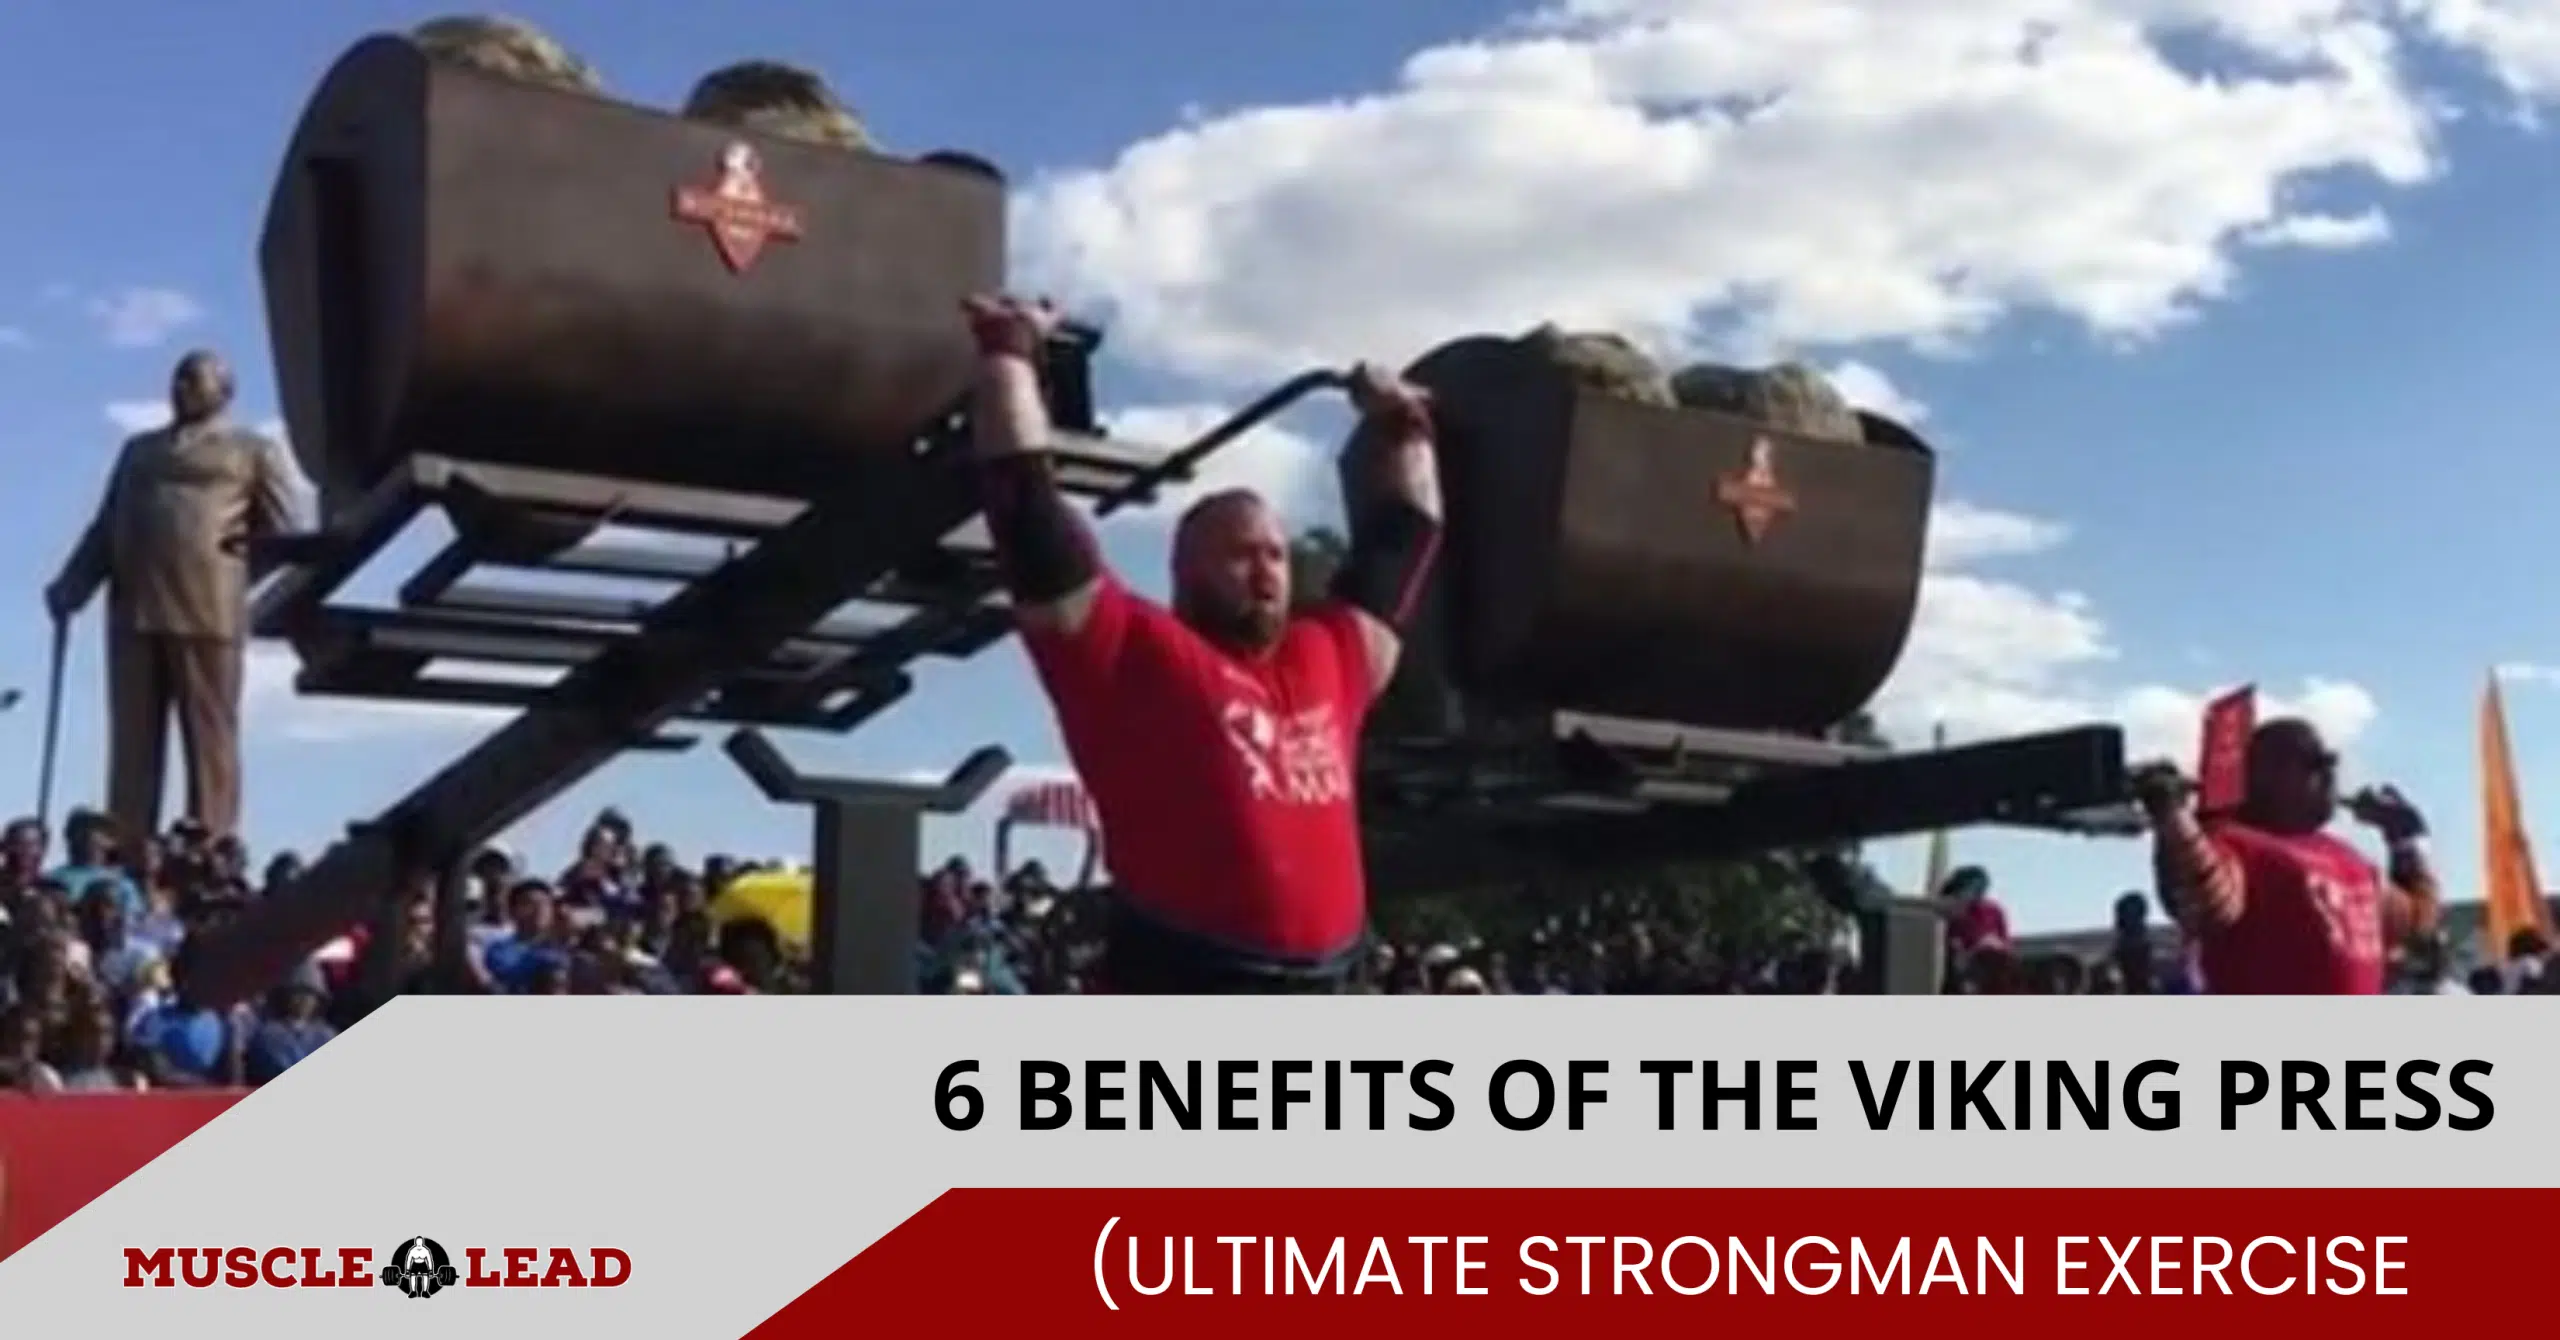 6 Benefits of the Viking Press: Ultimate Strongman Exercise